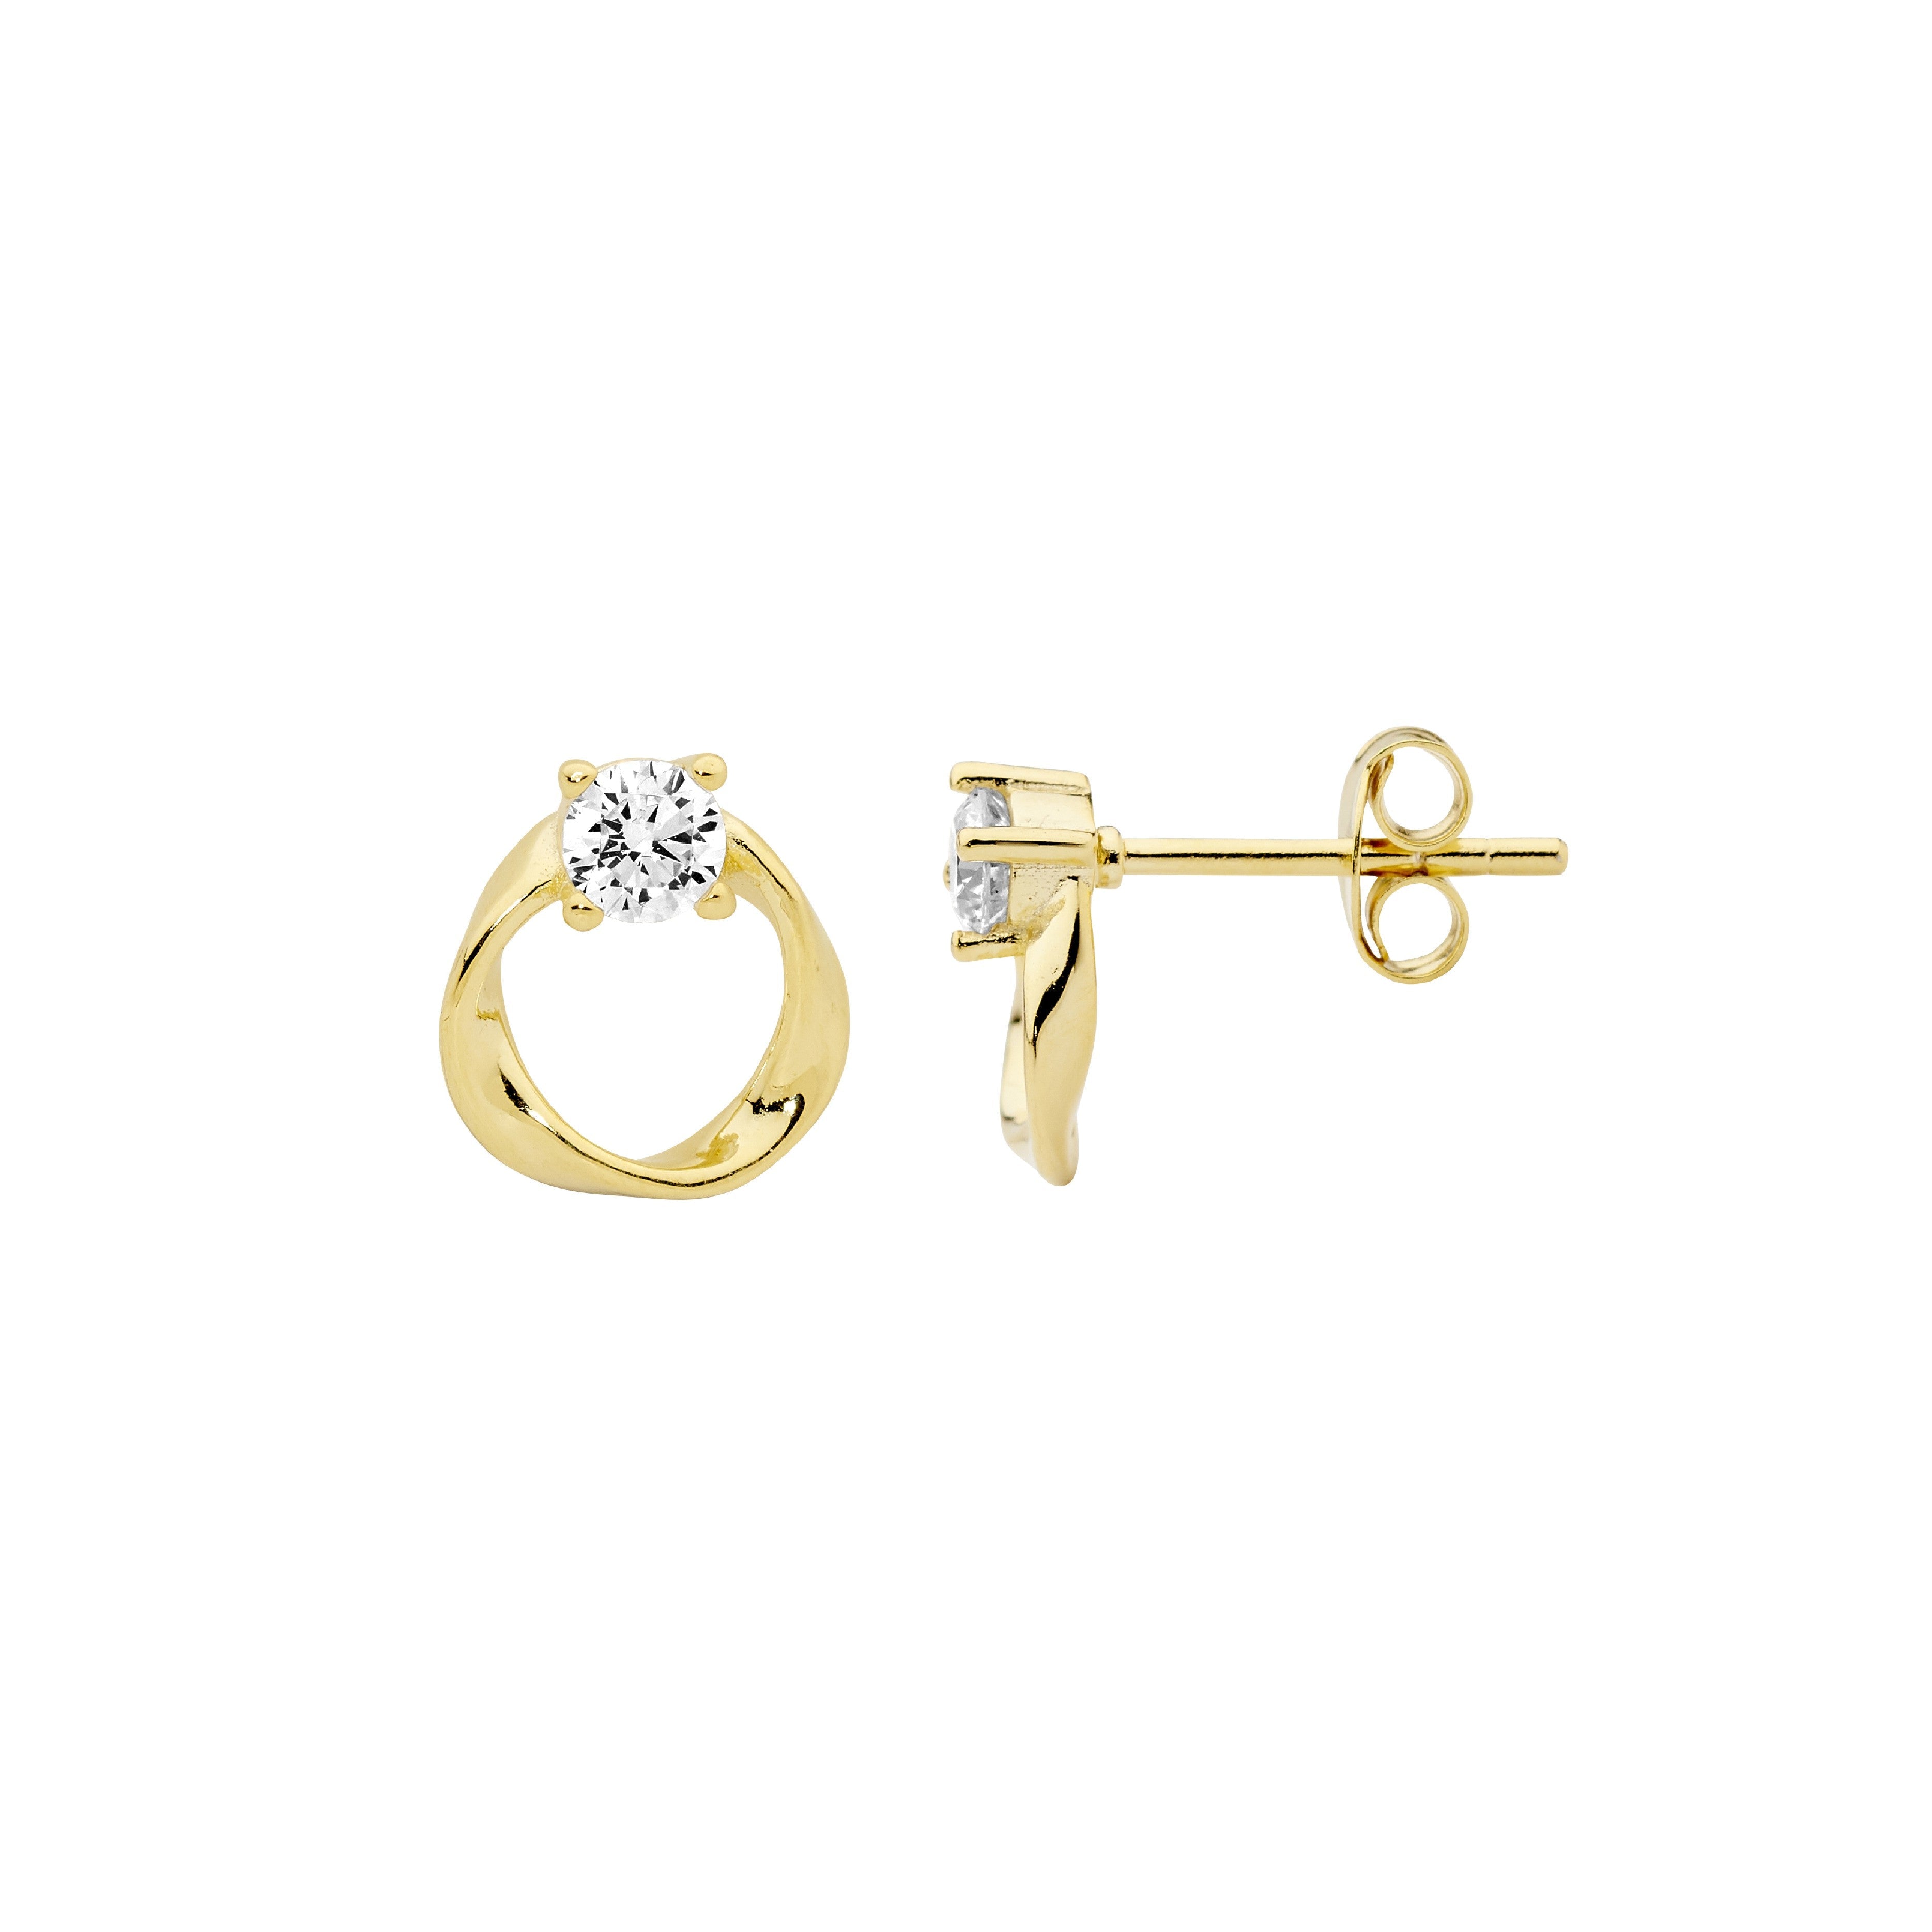 Sterling Silver 9mm Open Circle Twist Earrings With Cubic Zirconia & Gold Plating 